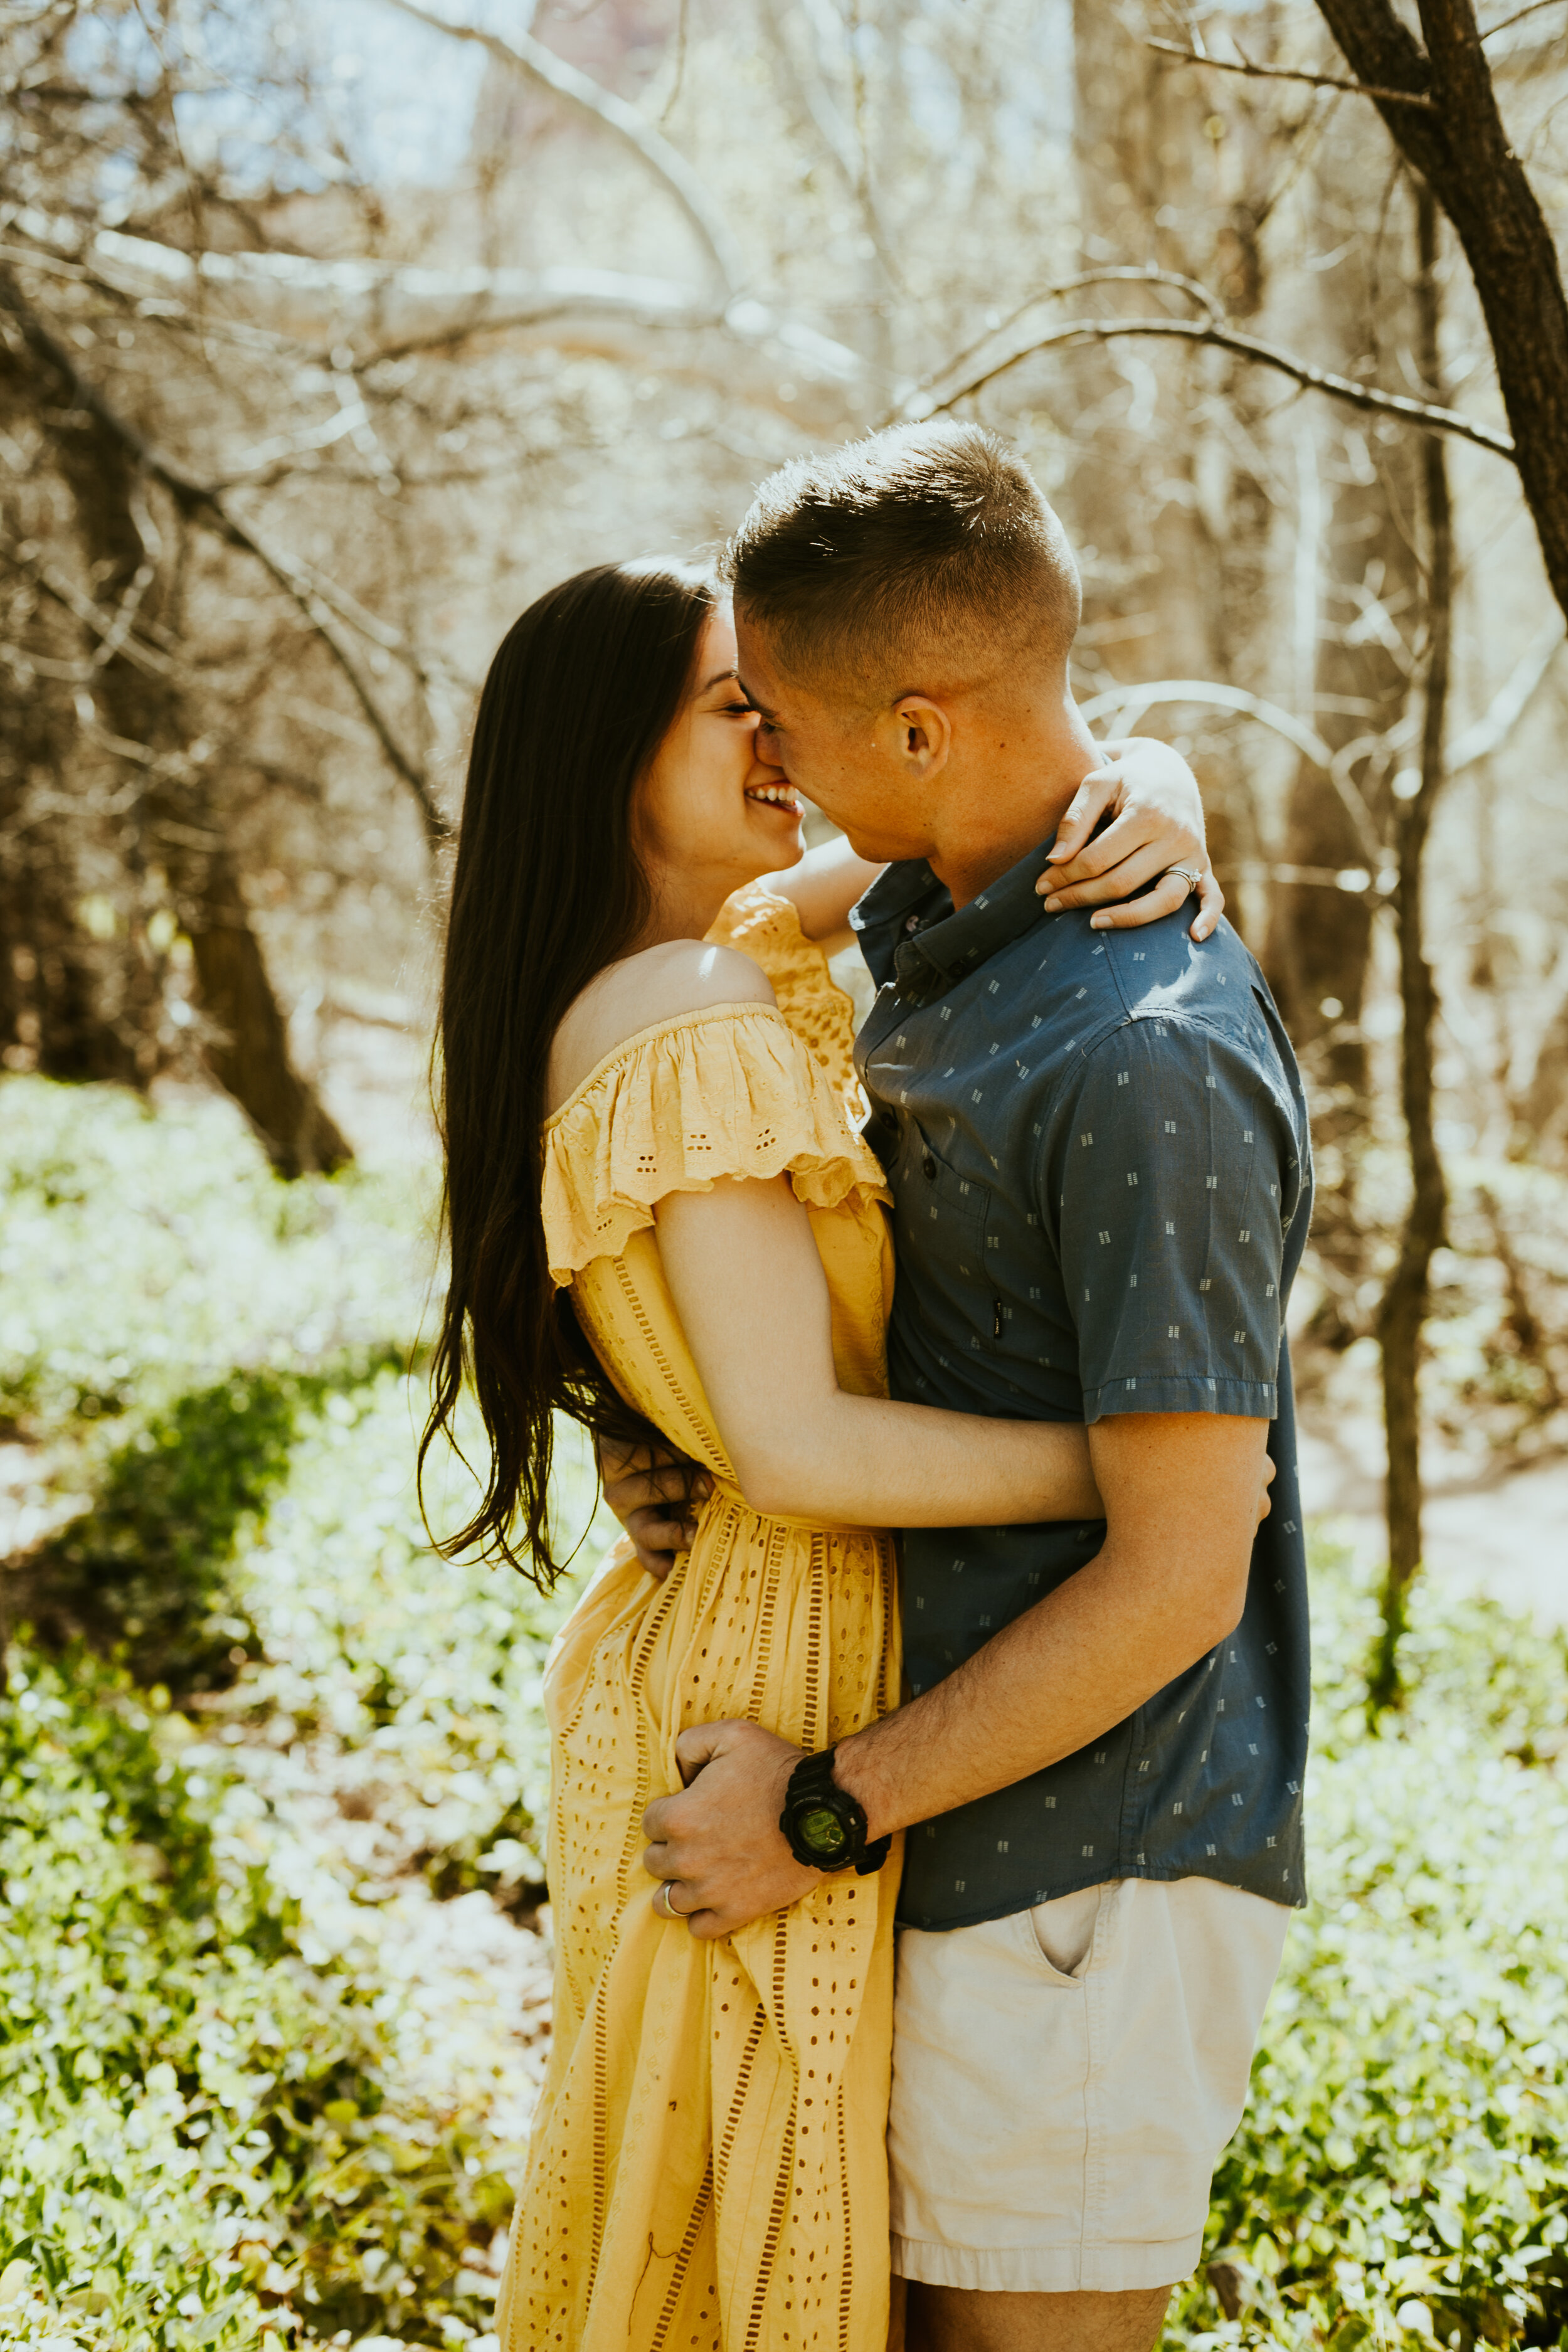 red rock crossing sedona arizona cathedral rock crescent moon ranch couple photos engagement photo outfit inspiration couple posing ideas midday photos anniversary photos-13.jpg